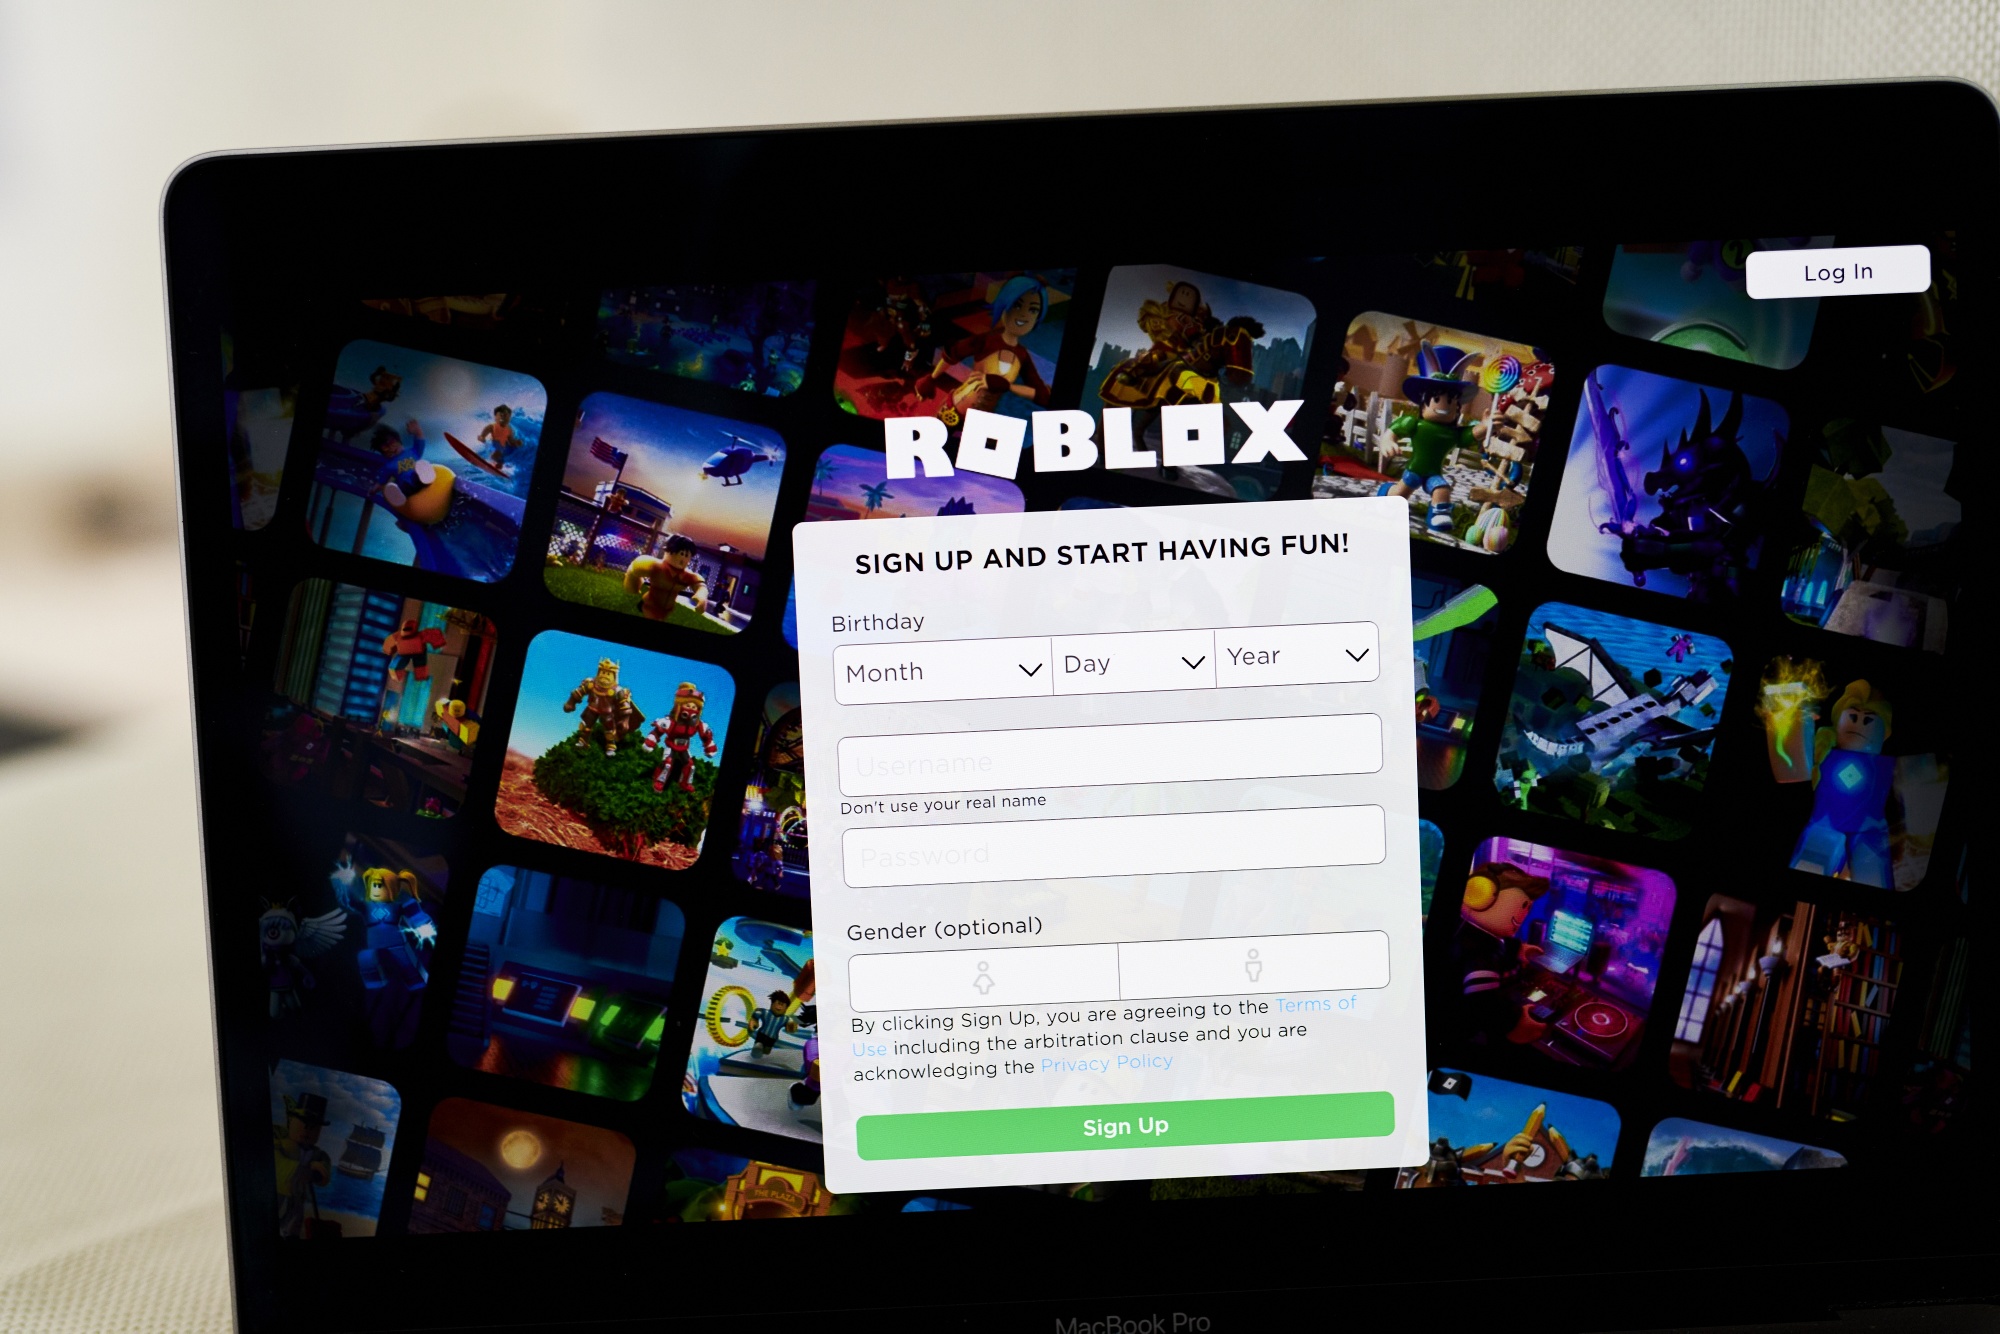 How to buy Robux in India on PC